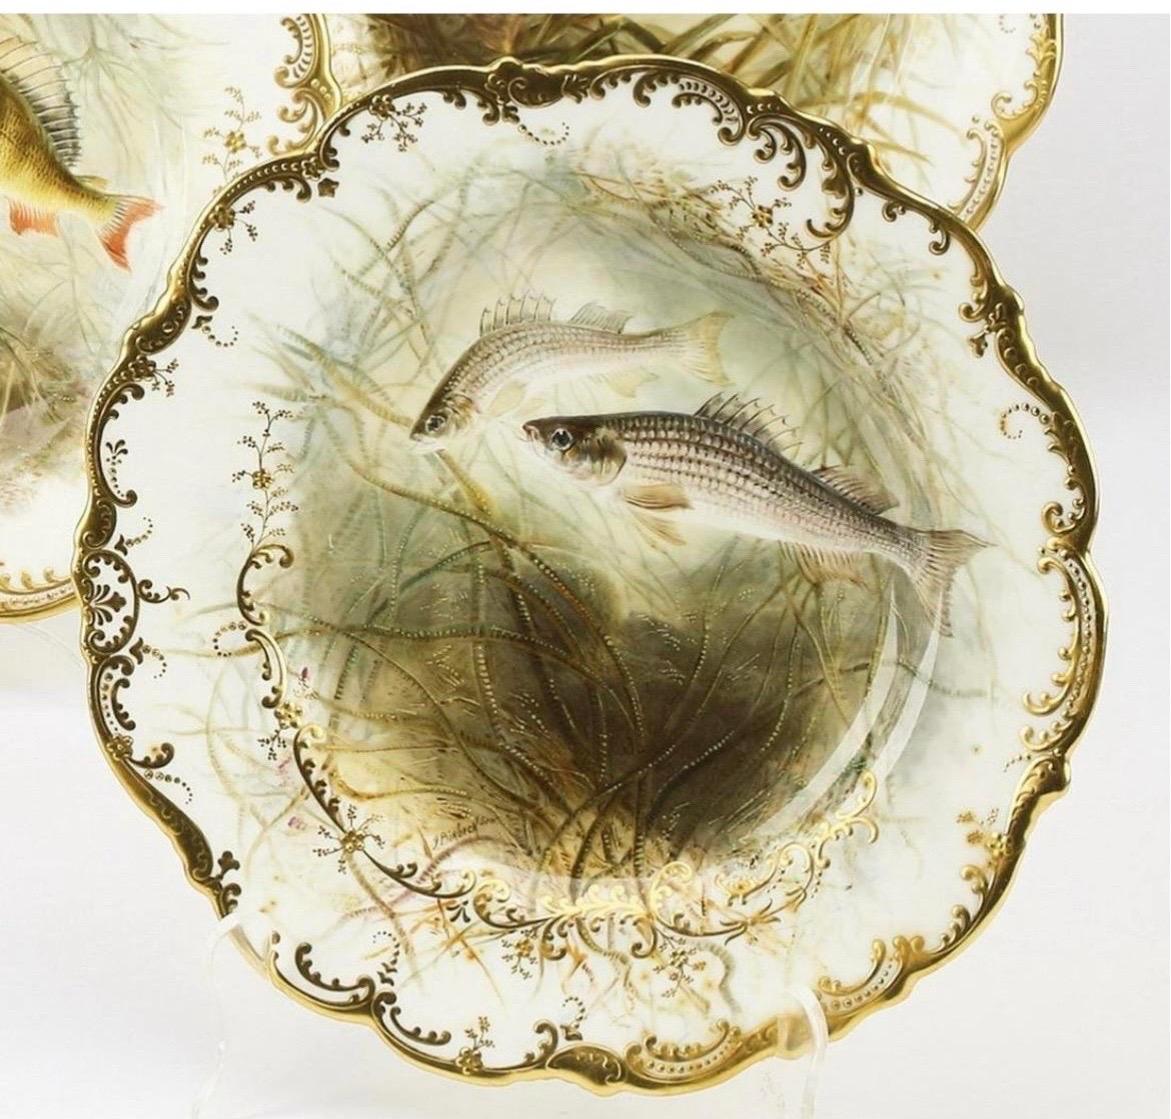 Set of eight hand painted 19th century English porcelain fish plates retailed by Tiffany & Co, New York, each having a scalloped rim with lavish gilt detail and decorated with a different species of fresh water fish including Rocky Mountain Trout,